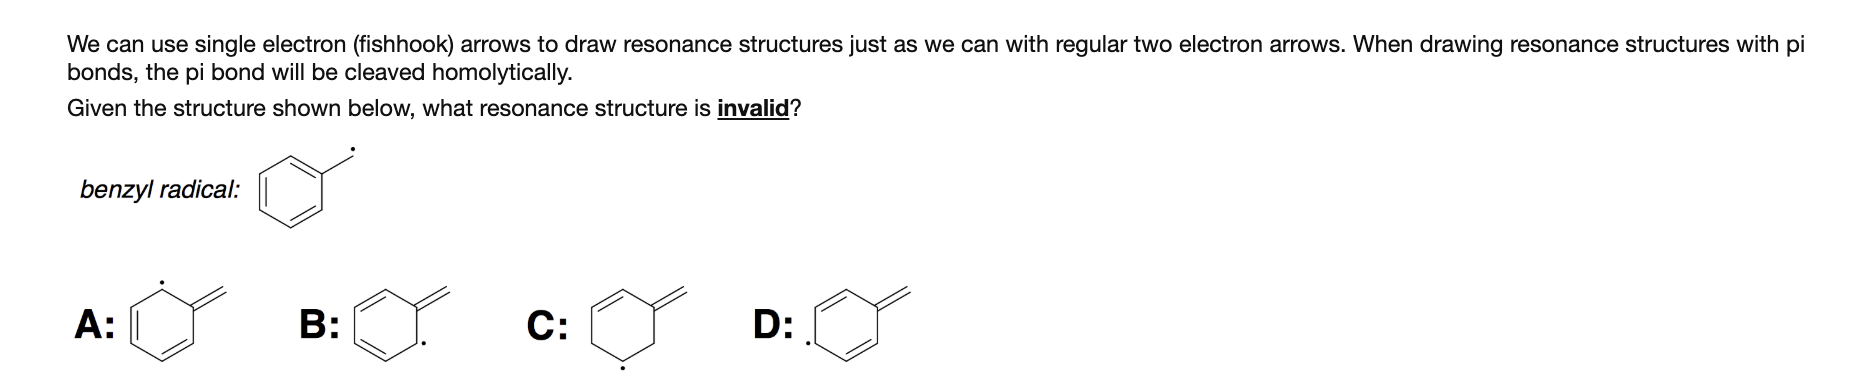 We can use single electron (fishhook) arrows to draw resonance structures just as we can with regular two electron arrows. When drawing resonance structures with pi
bonds, the pi bond will be cleaved homolytically.
Given the structure shown below, what resonance structure is invalid?
benzyl radical:
C:
B:
A:
D:
